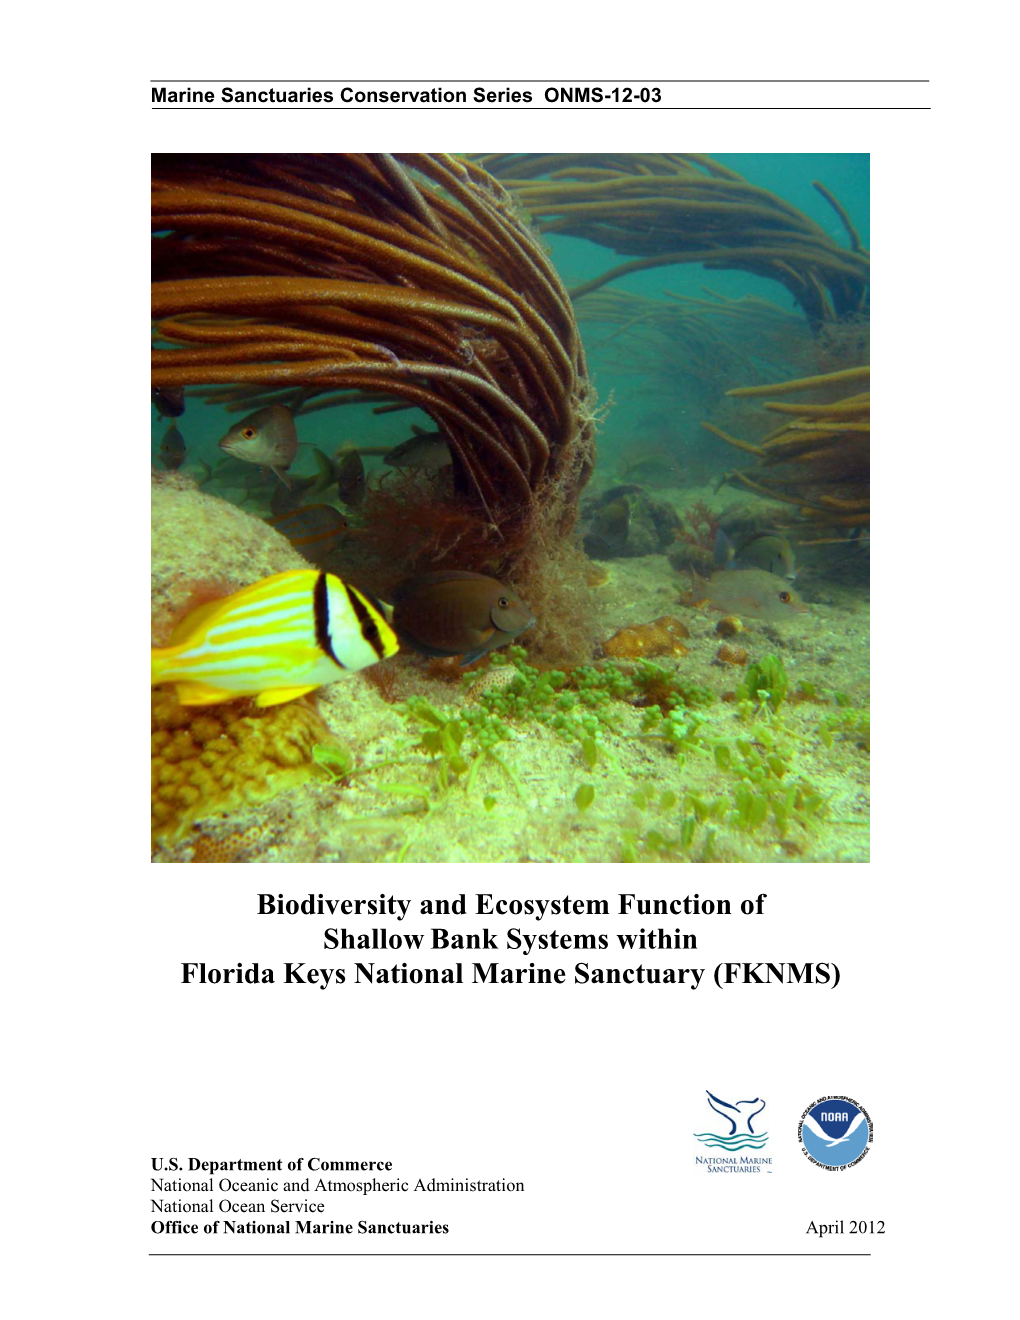 Biodiversity and Ecosystem Function of Shallowbank Systems Within